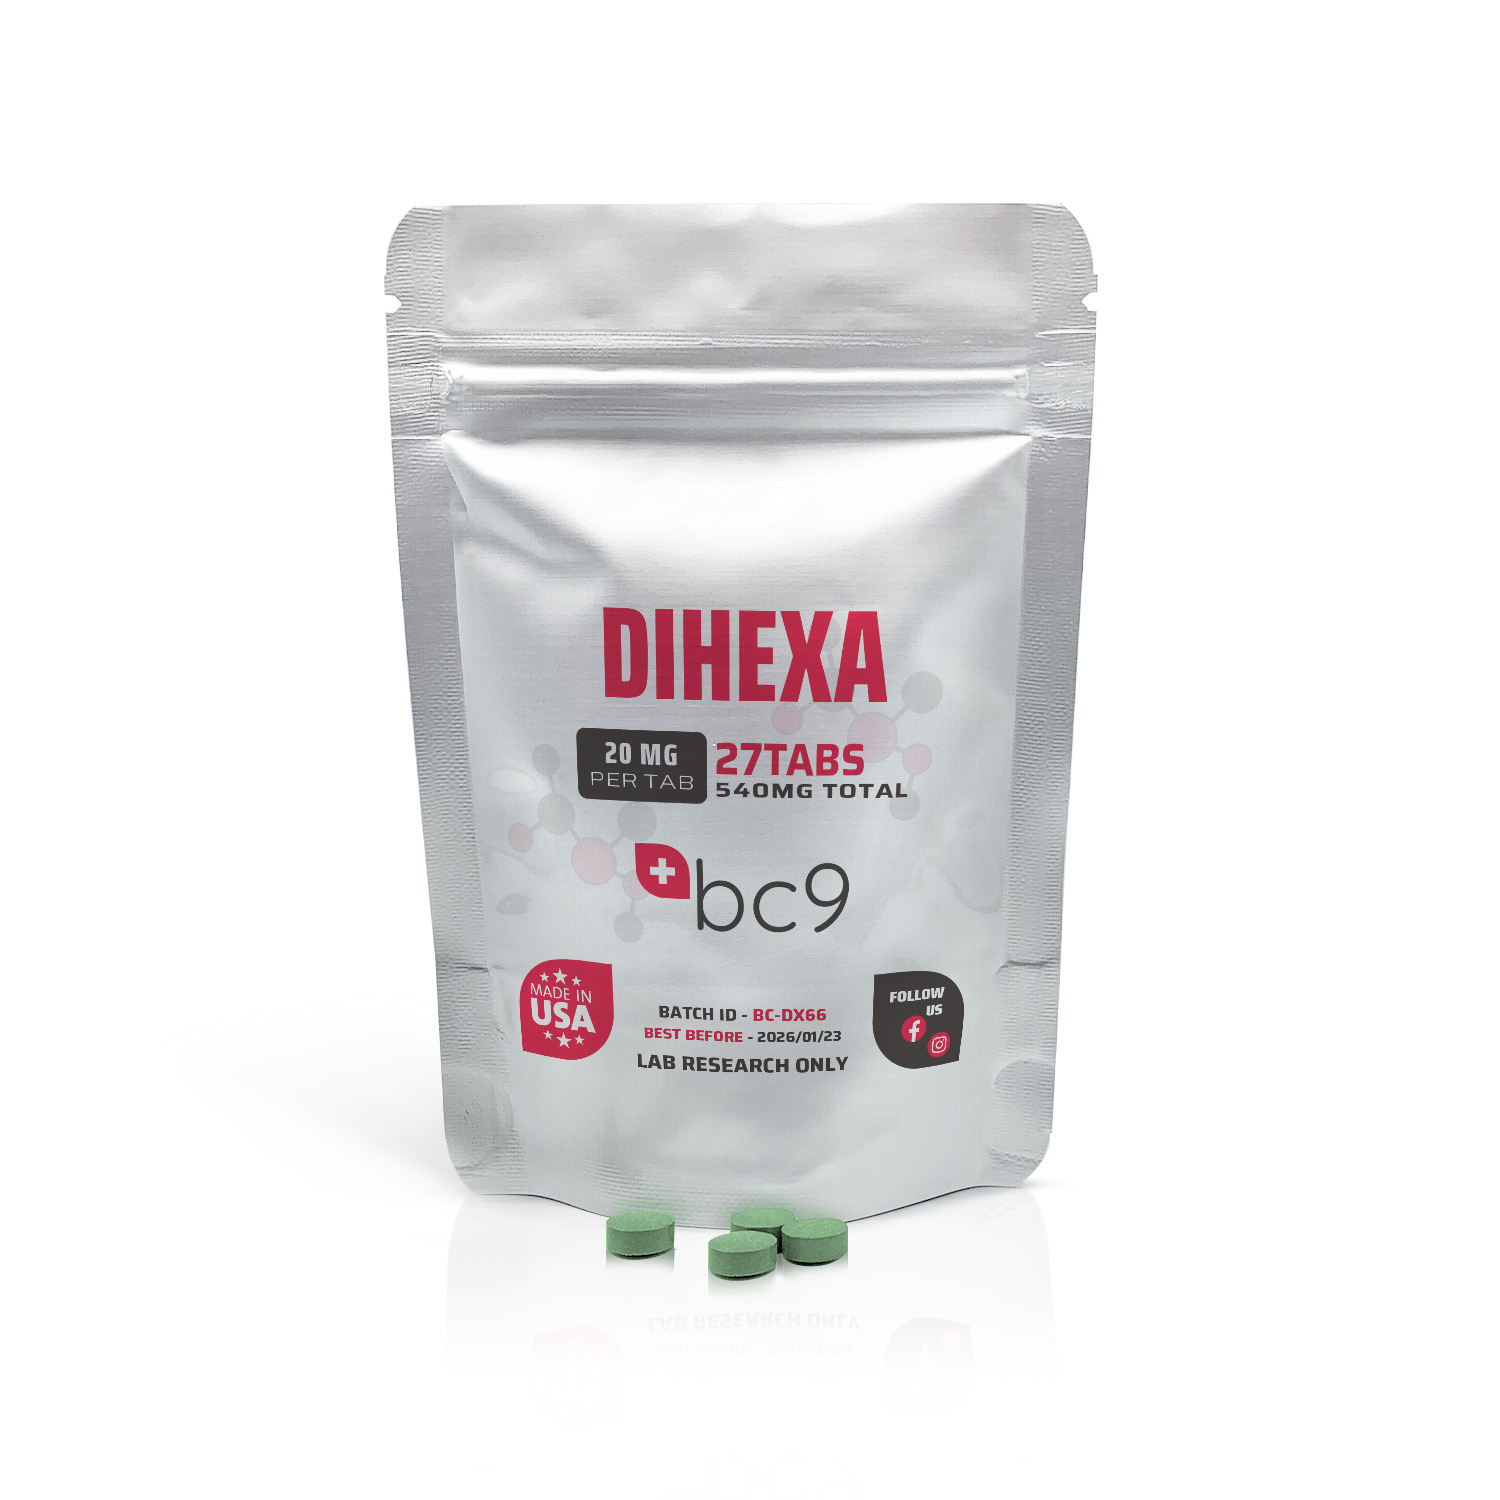 Dihexa Tablets For Sale | Fast Shipping | BC9.org